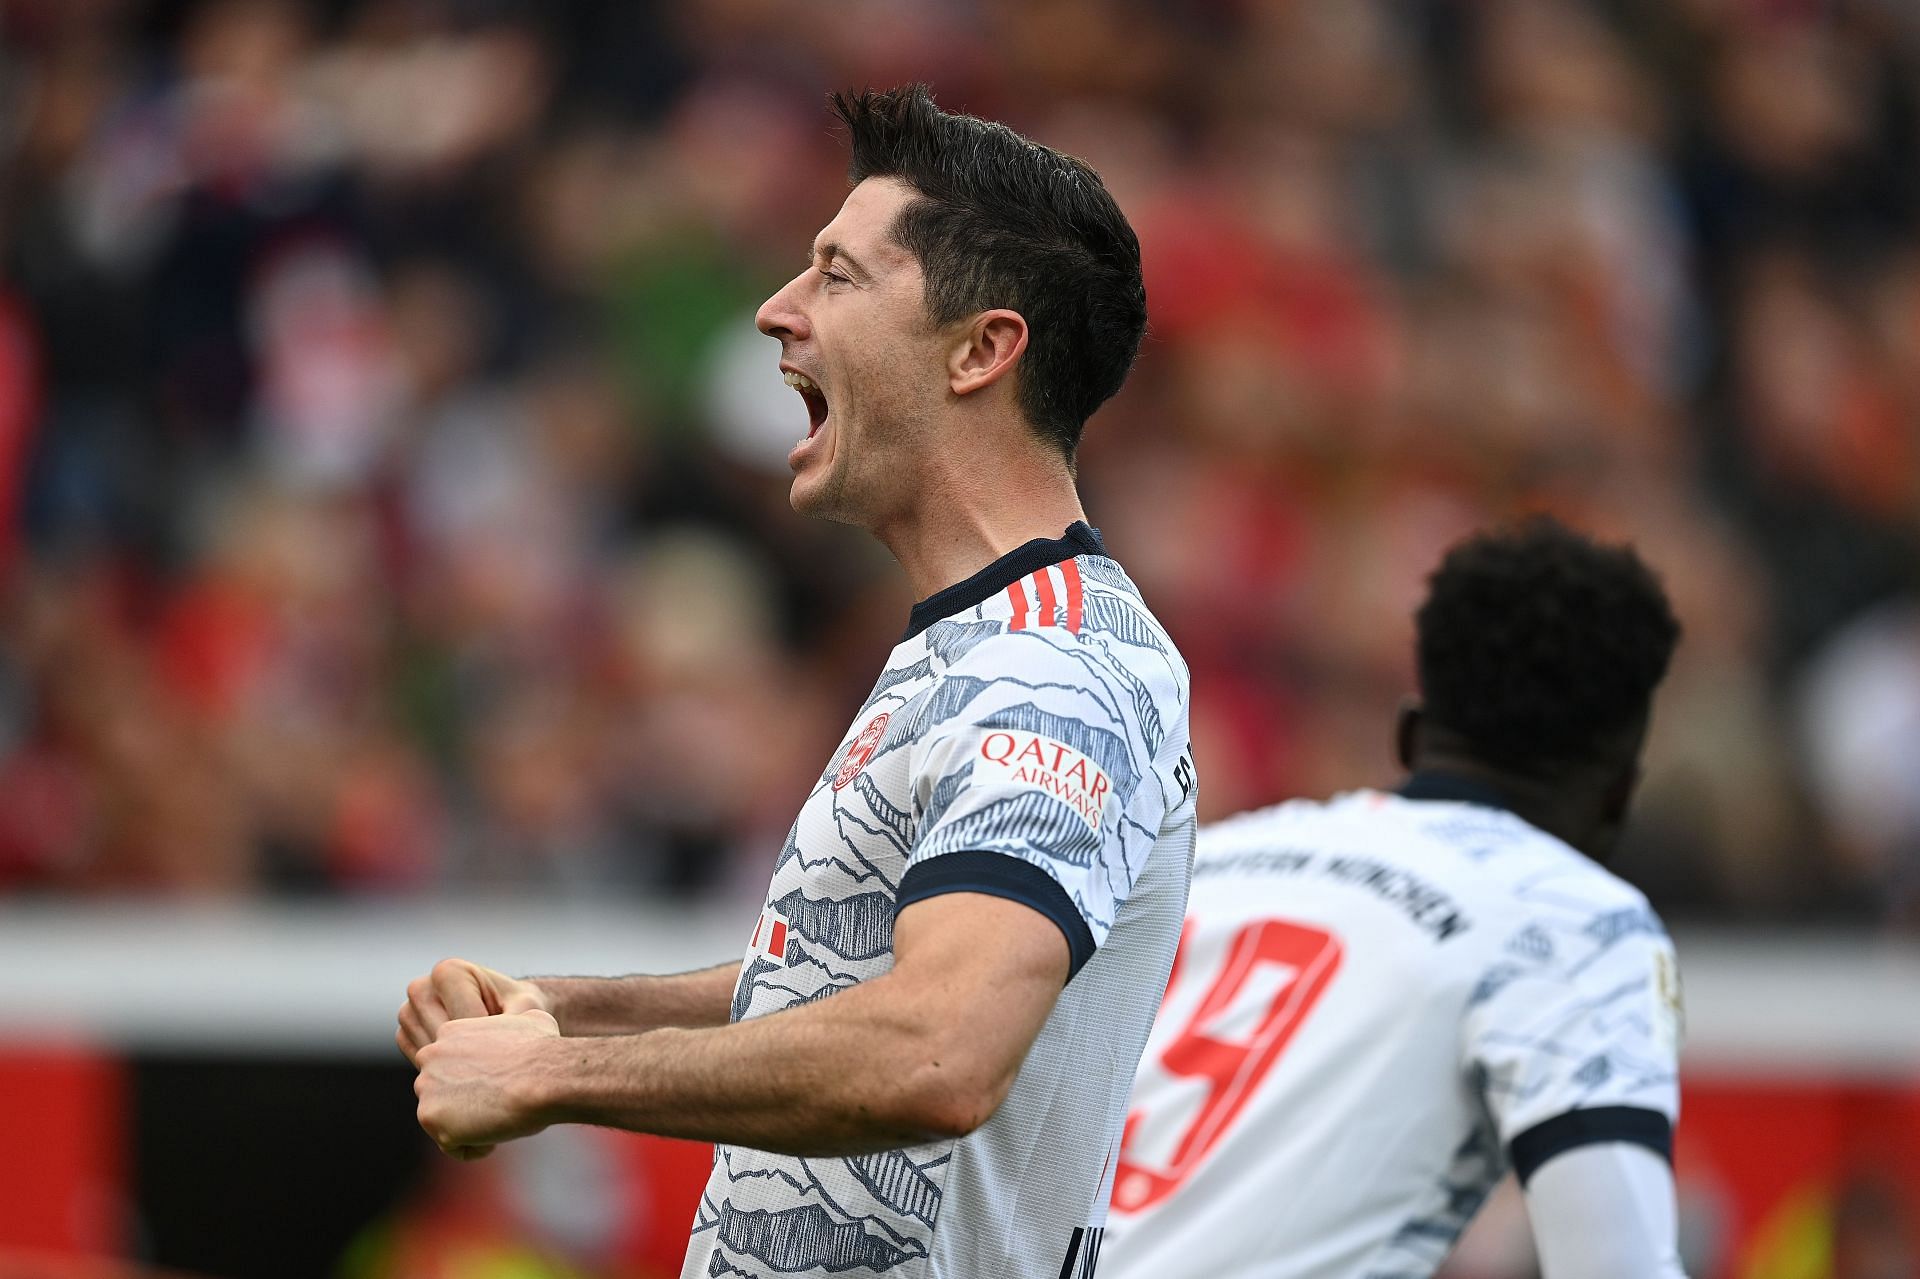 Lewandowski has been the driving force behind Bayern (Images via Getty)